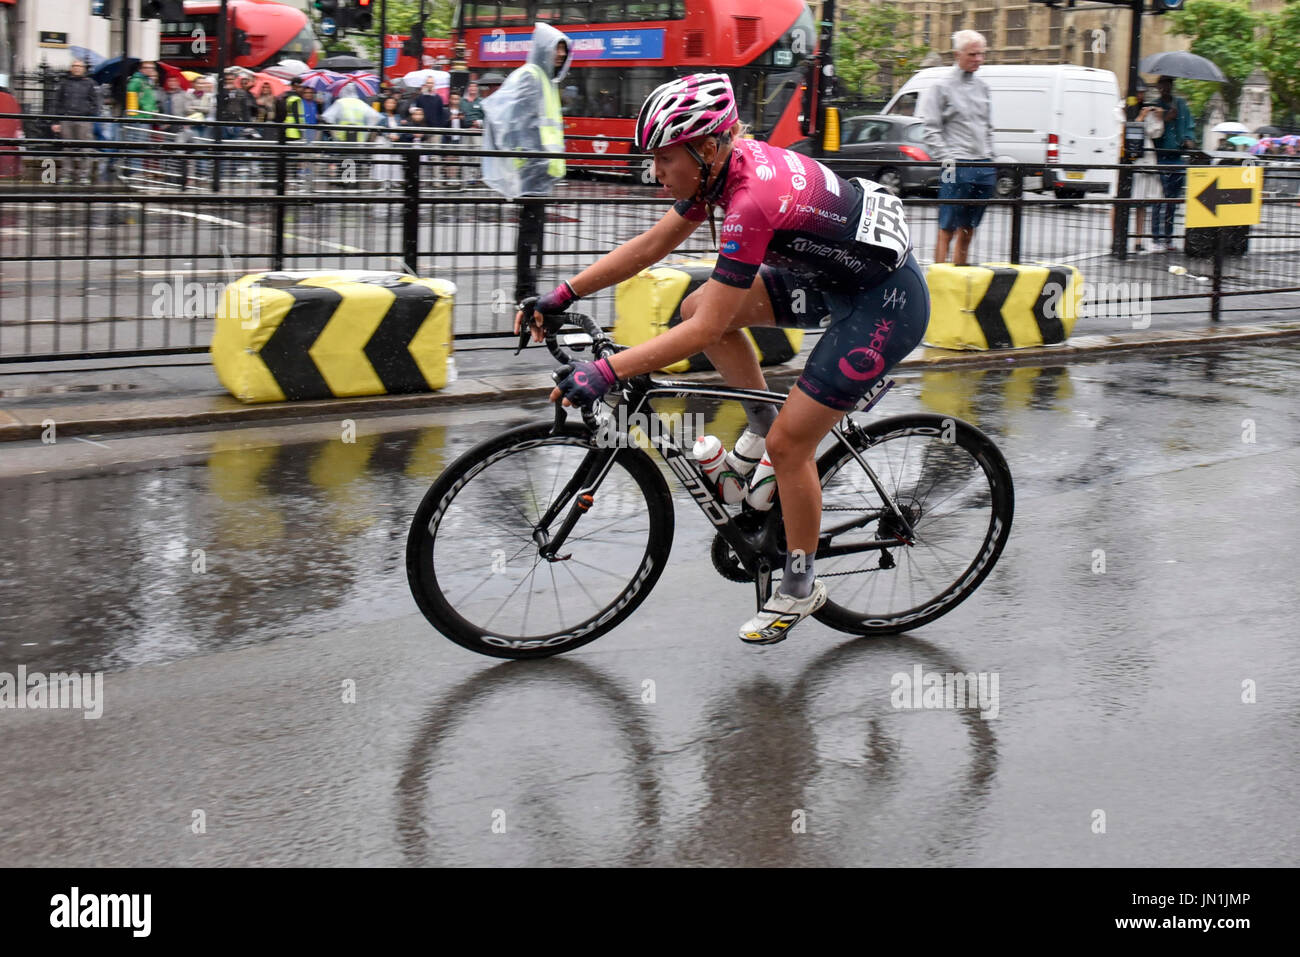 London, UK.  29 July 2017.  Elite women riders pass through Parliament Square during the Prudential RideLondon Classique riding 12 laps round a 5.5km circuit in central London.  Ranked as one of the top women's UCI WorldTour events, prize money for the race is the highest ever for a women's one day race and features 18 of the top 20 teams from the Women's World Tour.  Credit: Stephen Chung / Alamy Live News Stock Photo